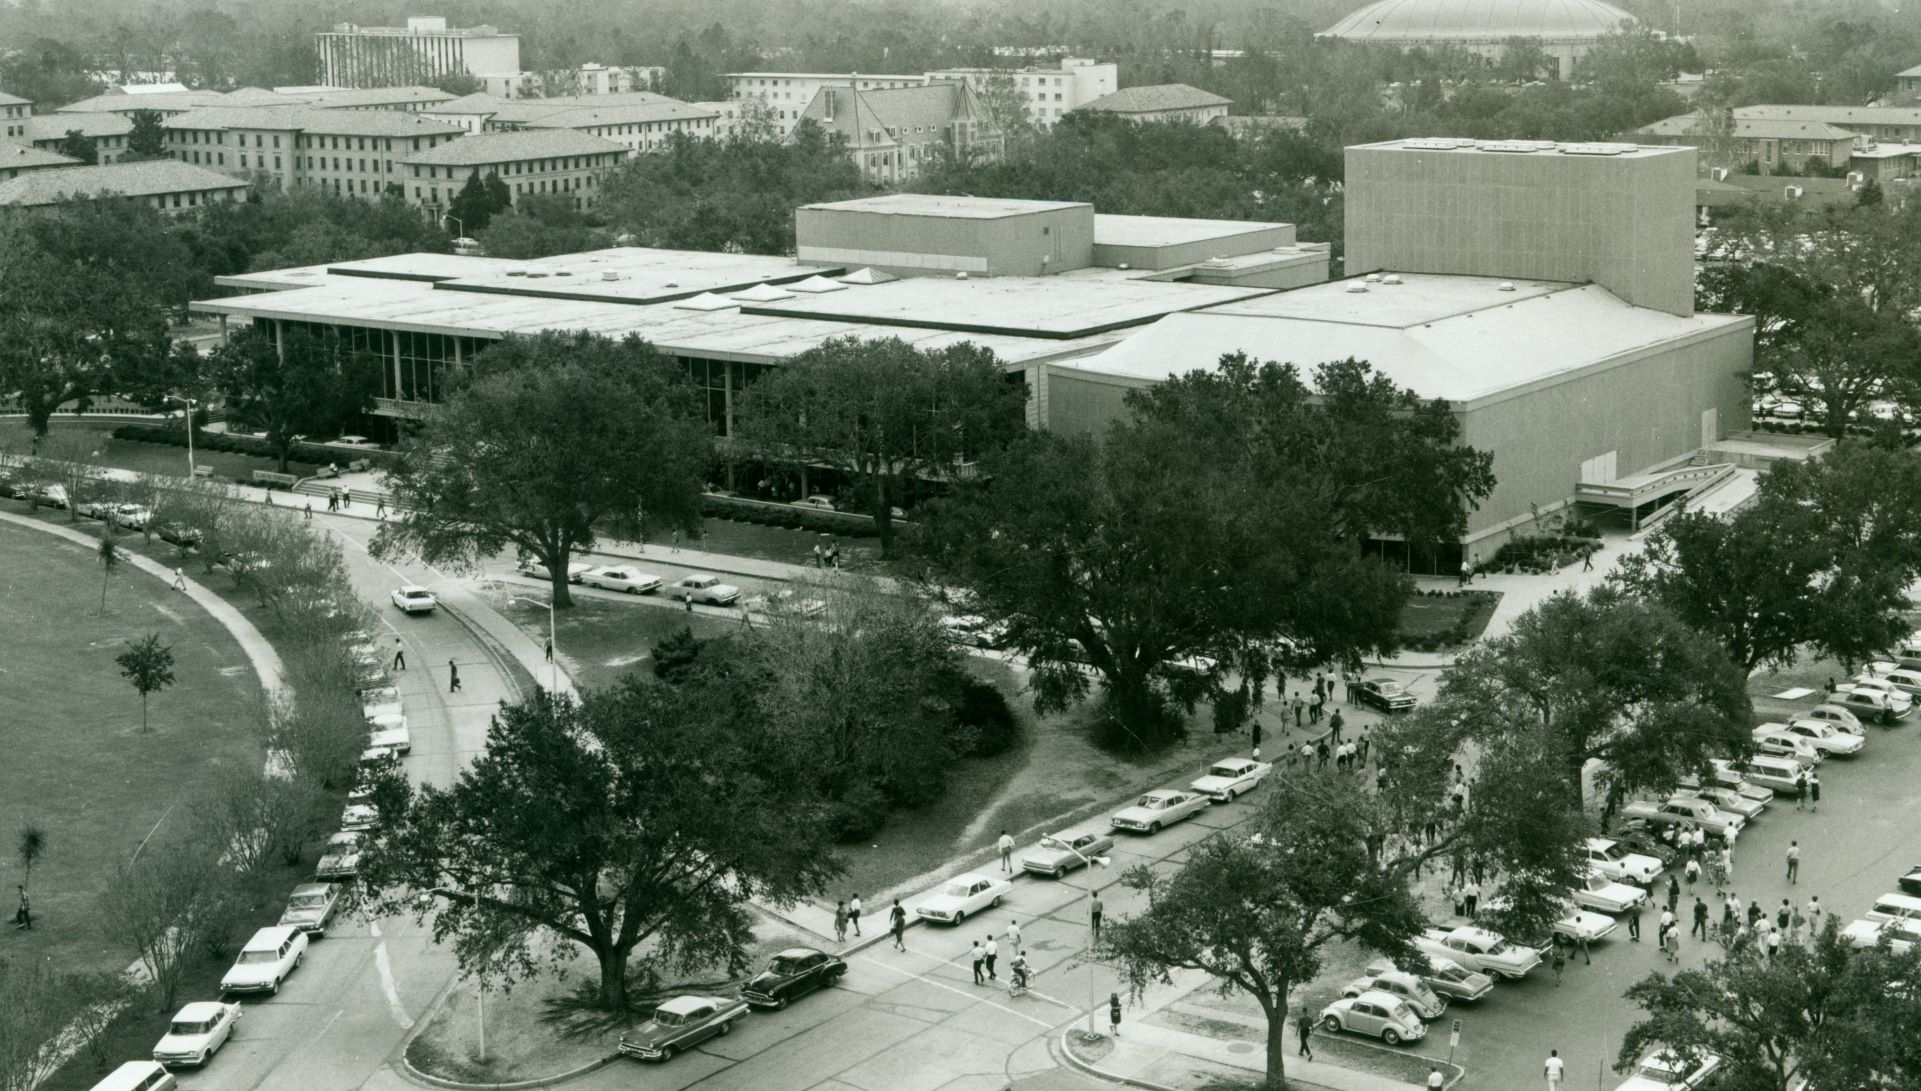 Birds eye view of the union taken in the 1970s